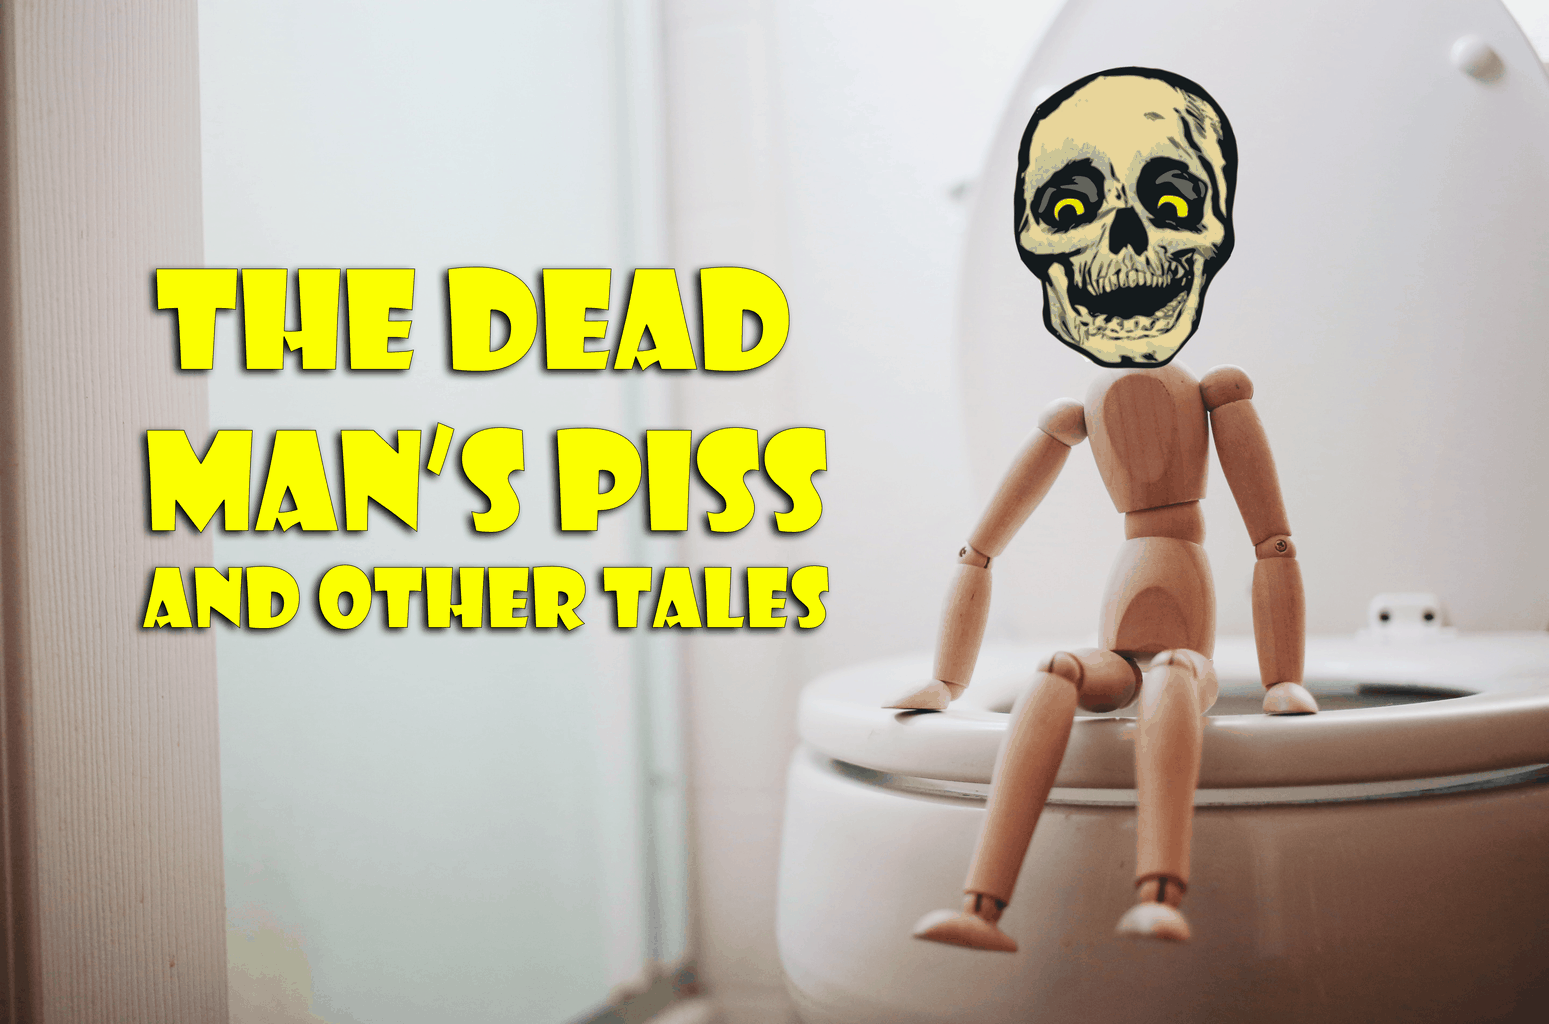 I Moved! The Dead Man’s Piss and Other Tales